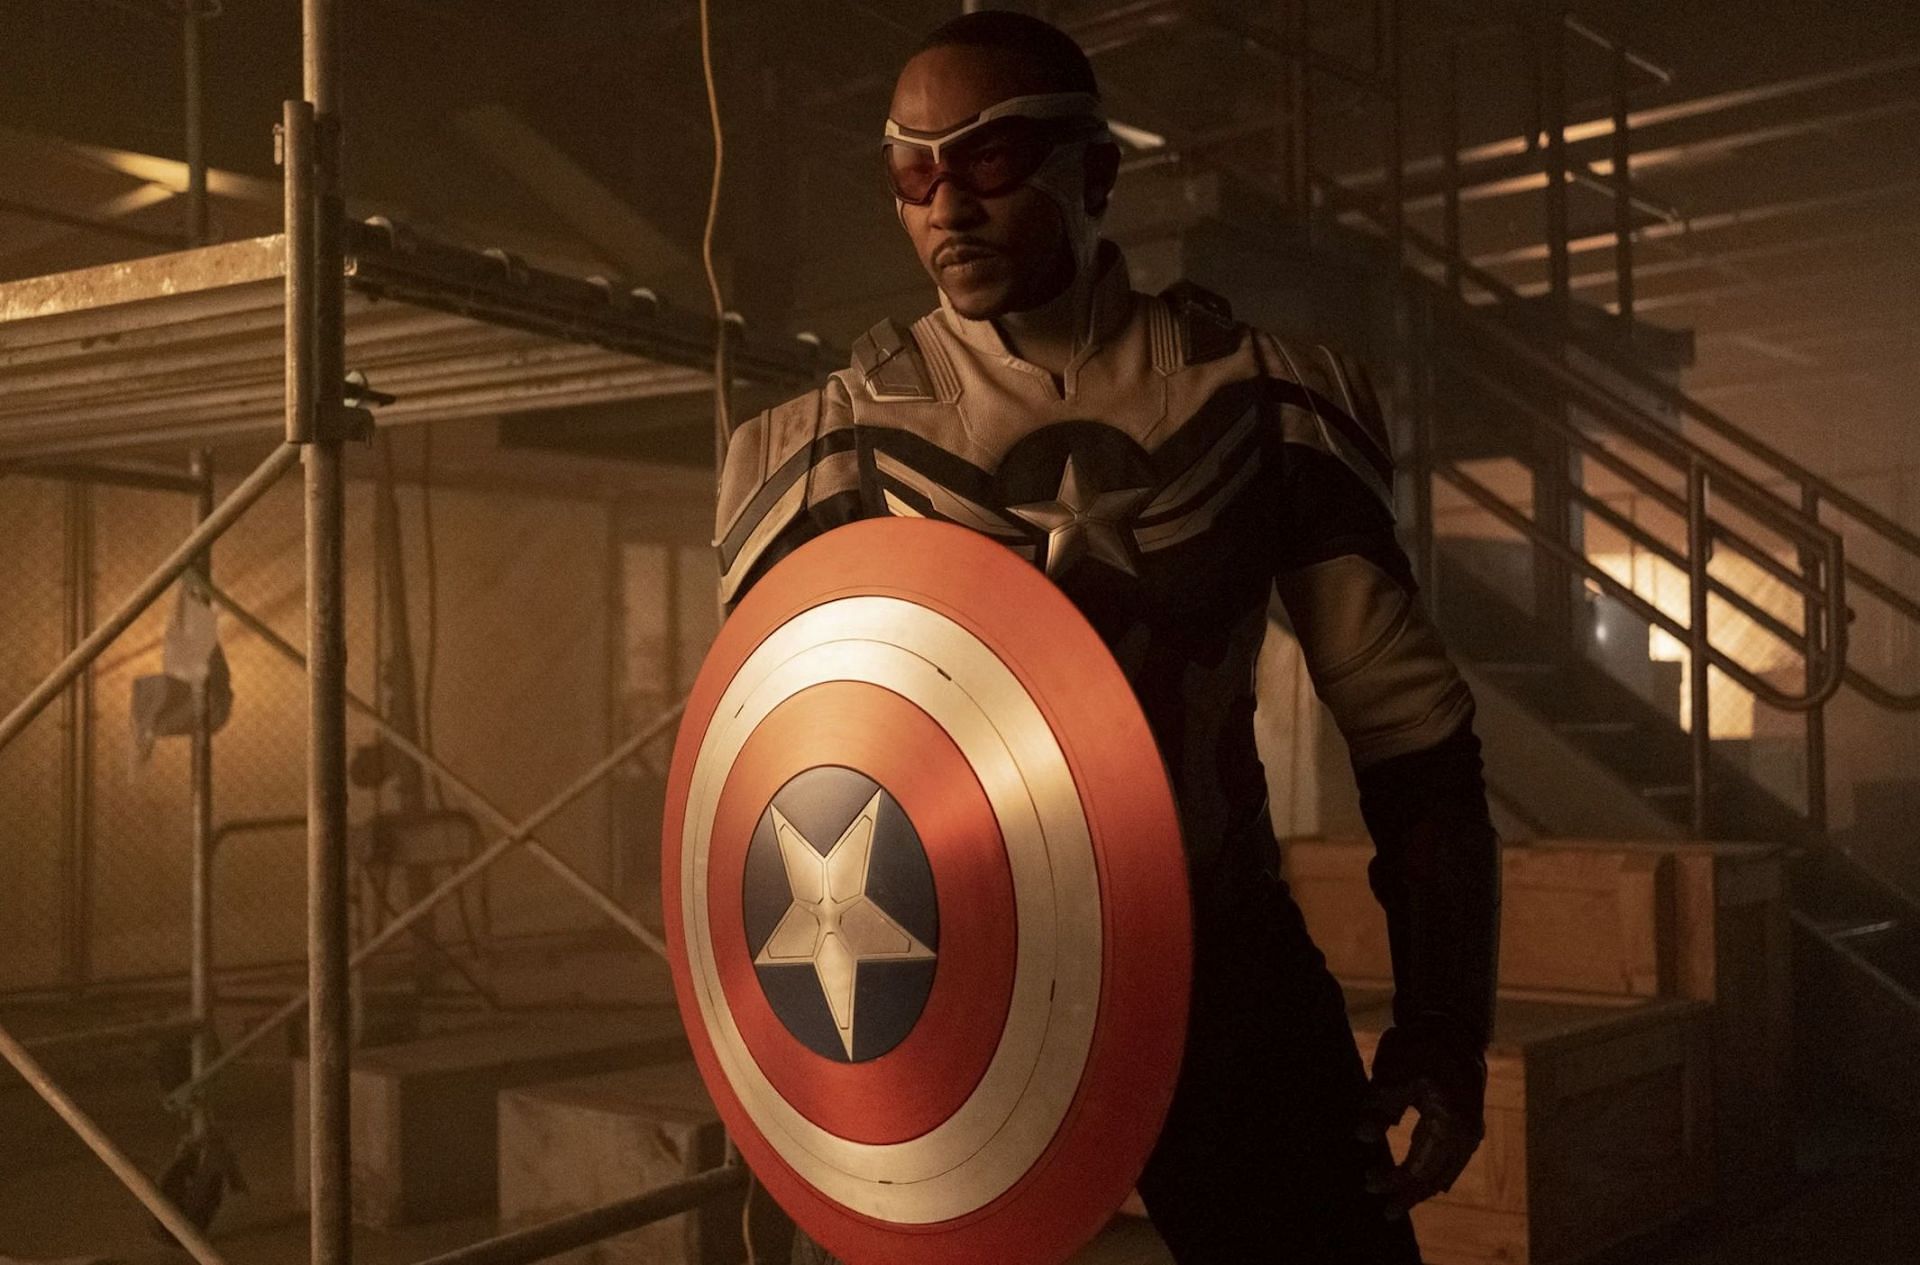 Anthony Mackie debuts as Captain America in the highly anticipated film (Image via Marvel Studios)